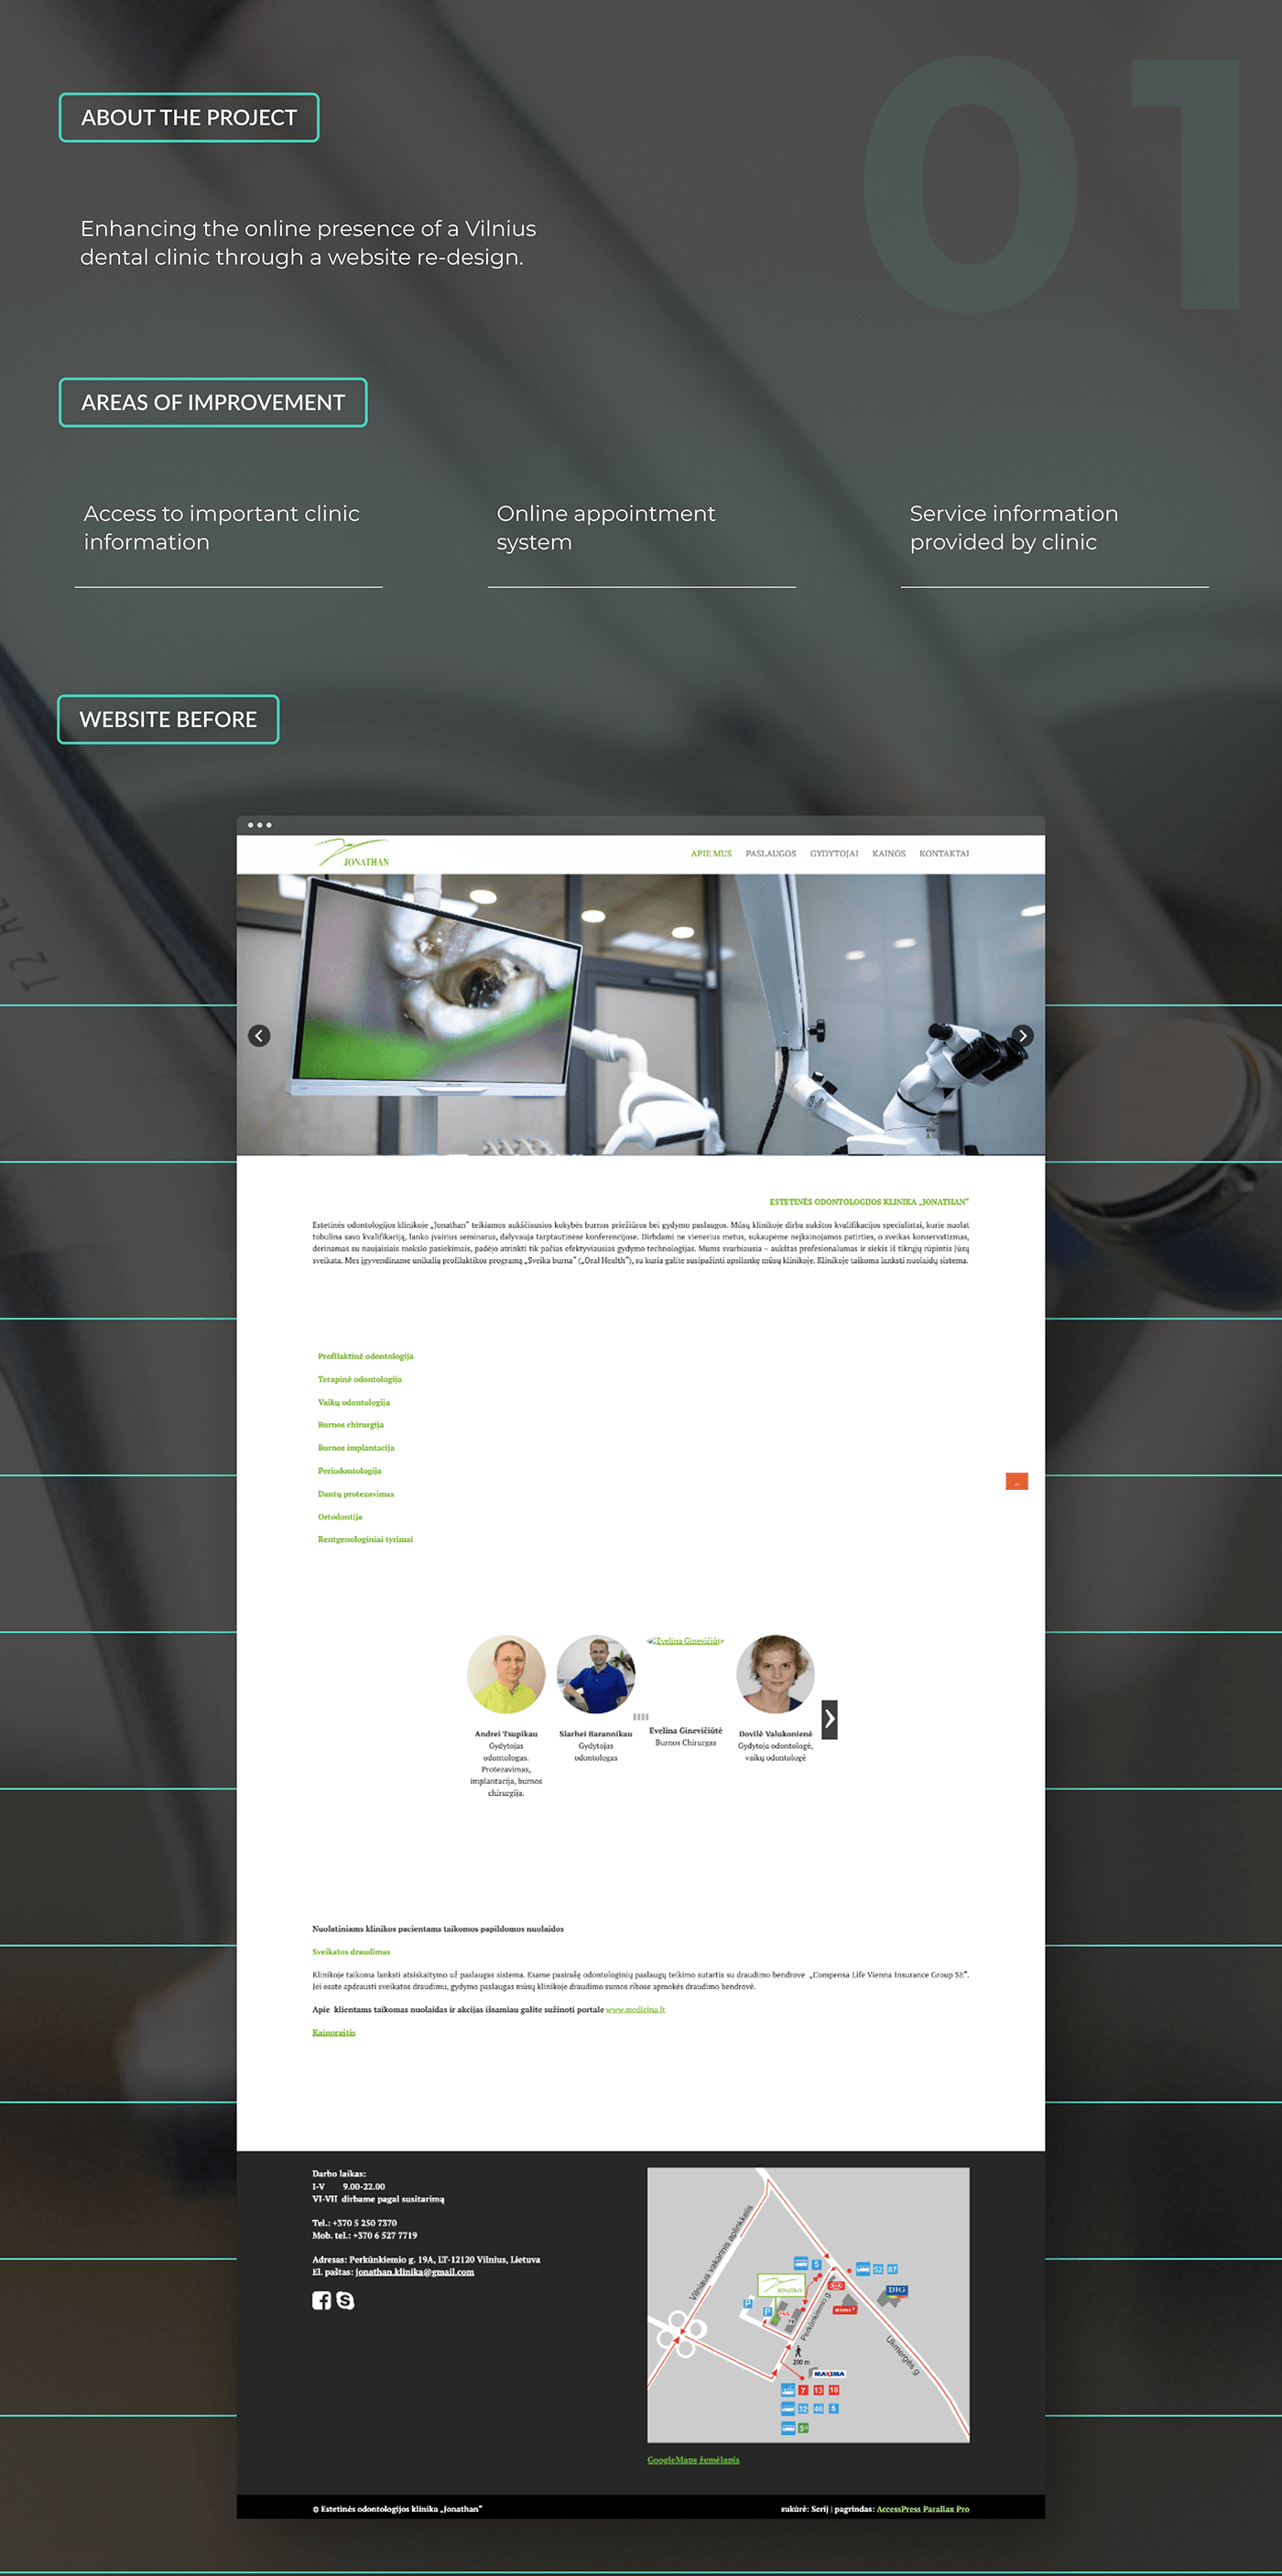 redesign website landing page dental clinic